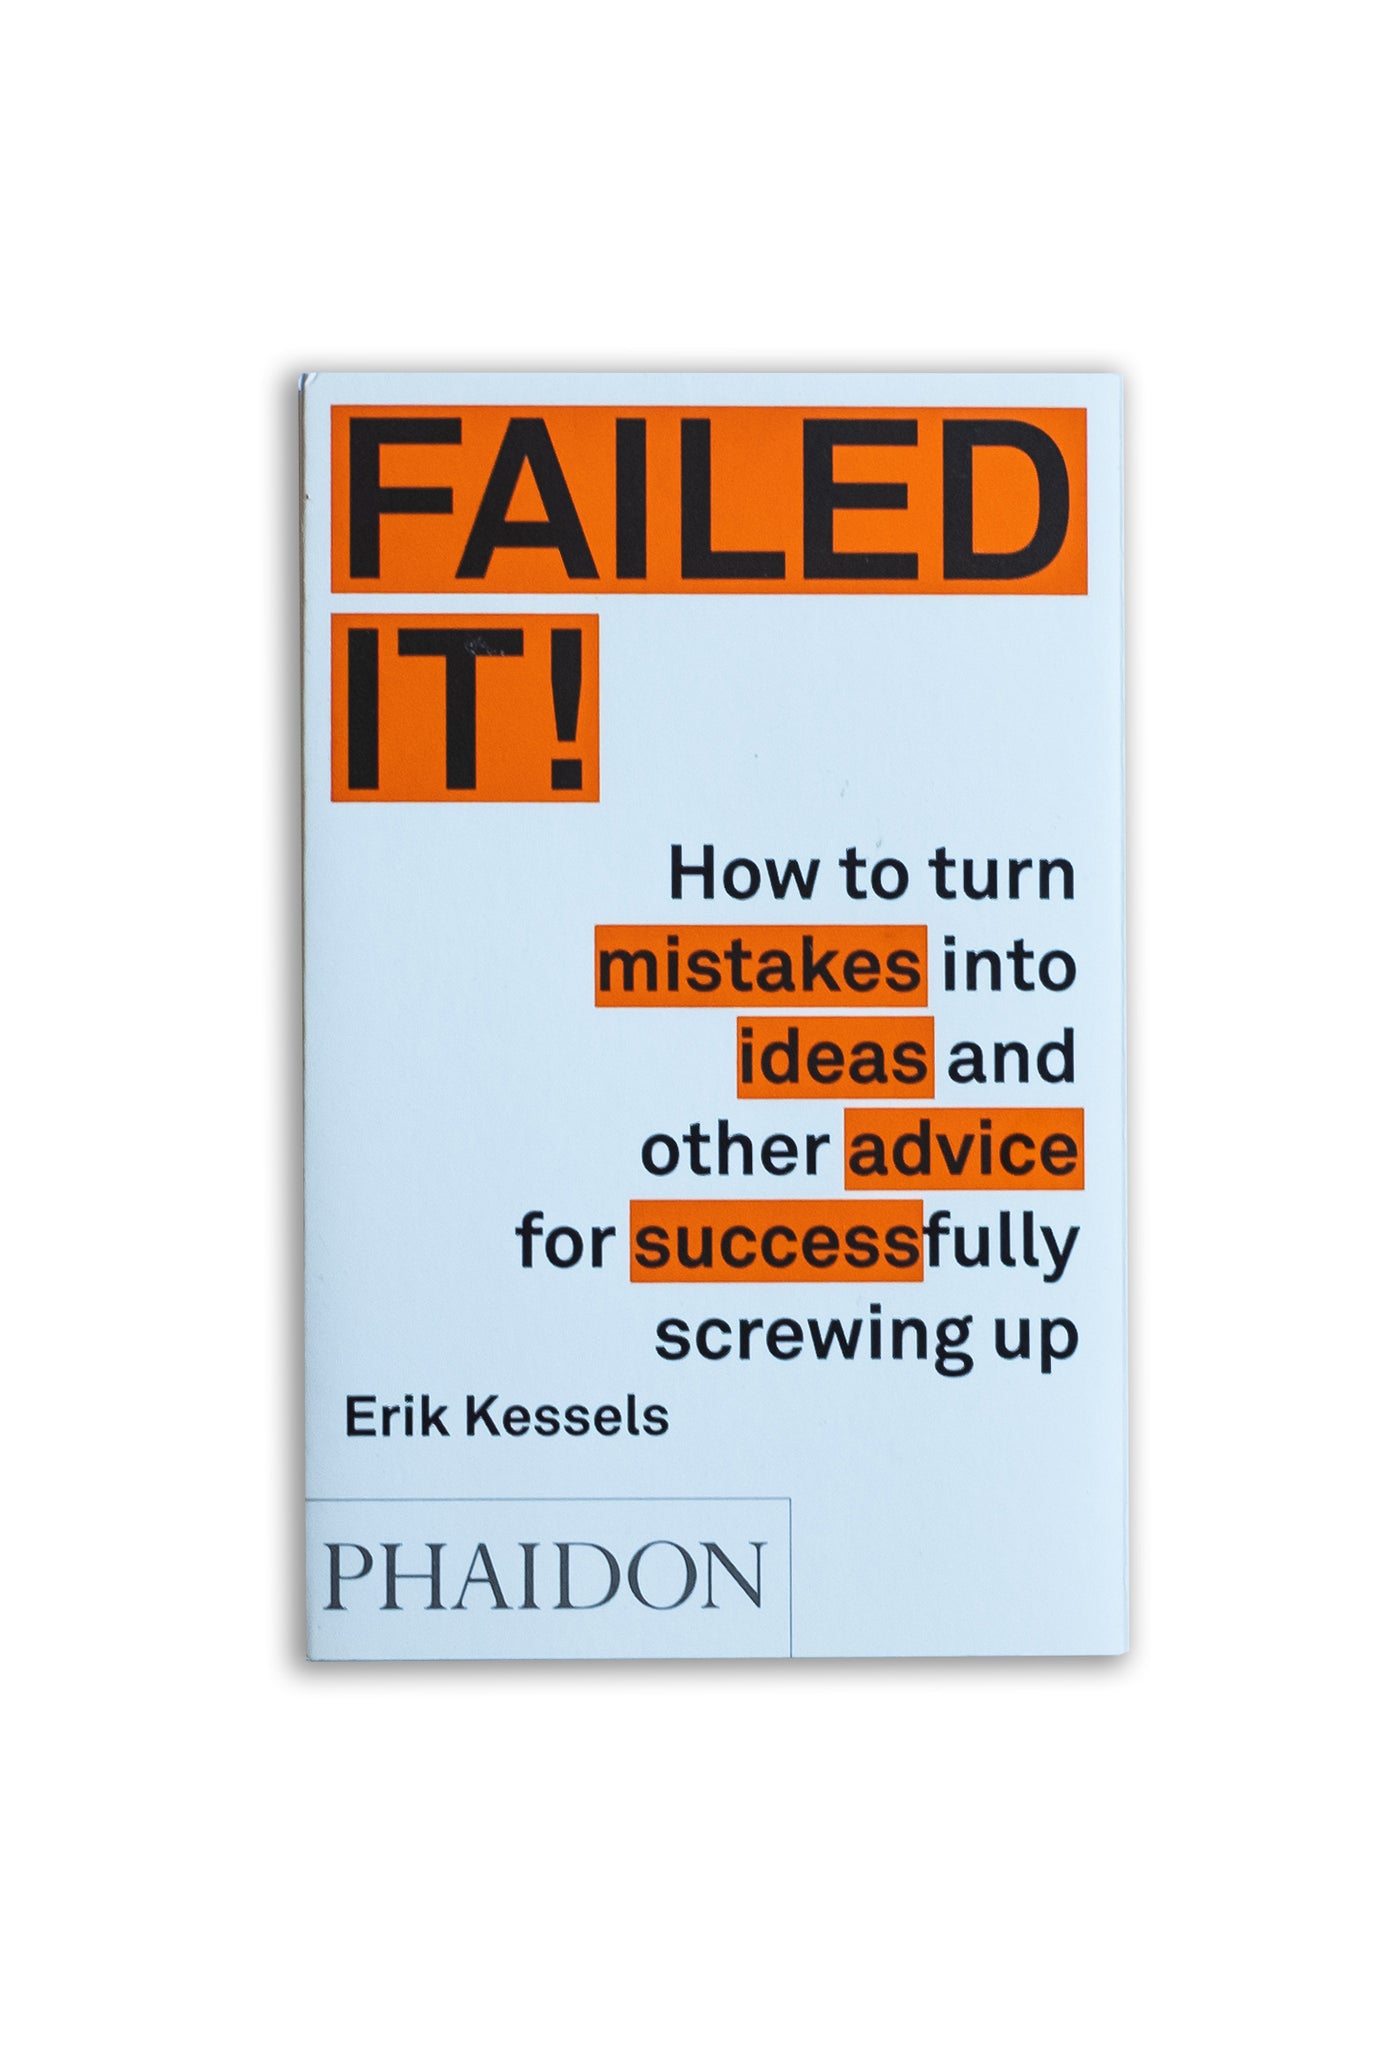 Failed It!: How to turn mistakes into ideas and other advice for successfully screwing up